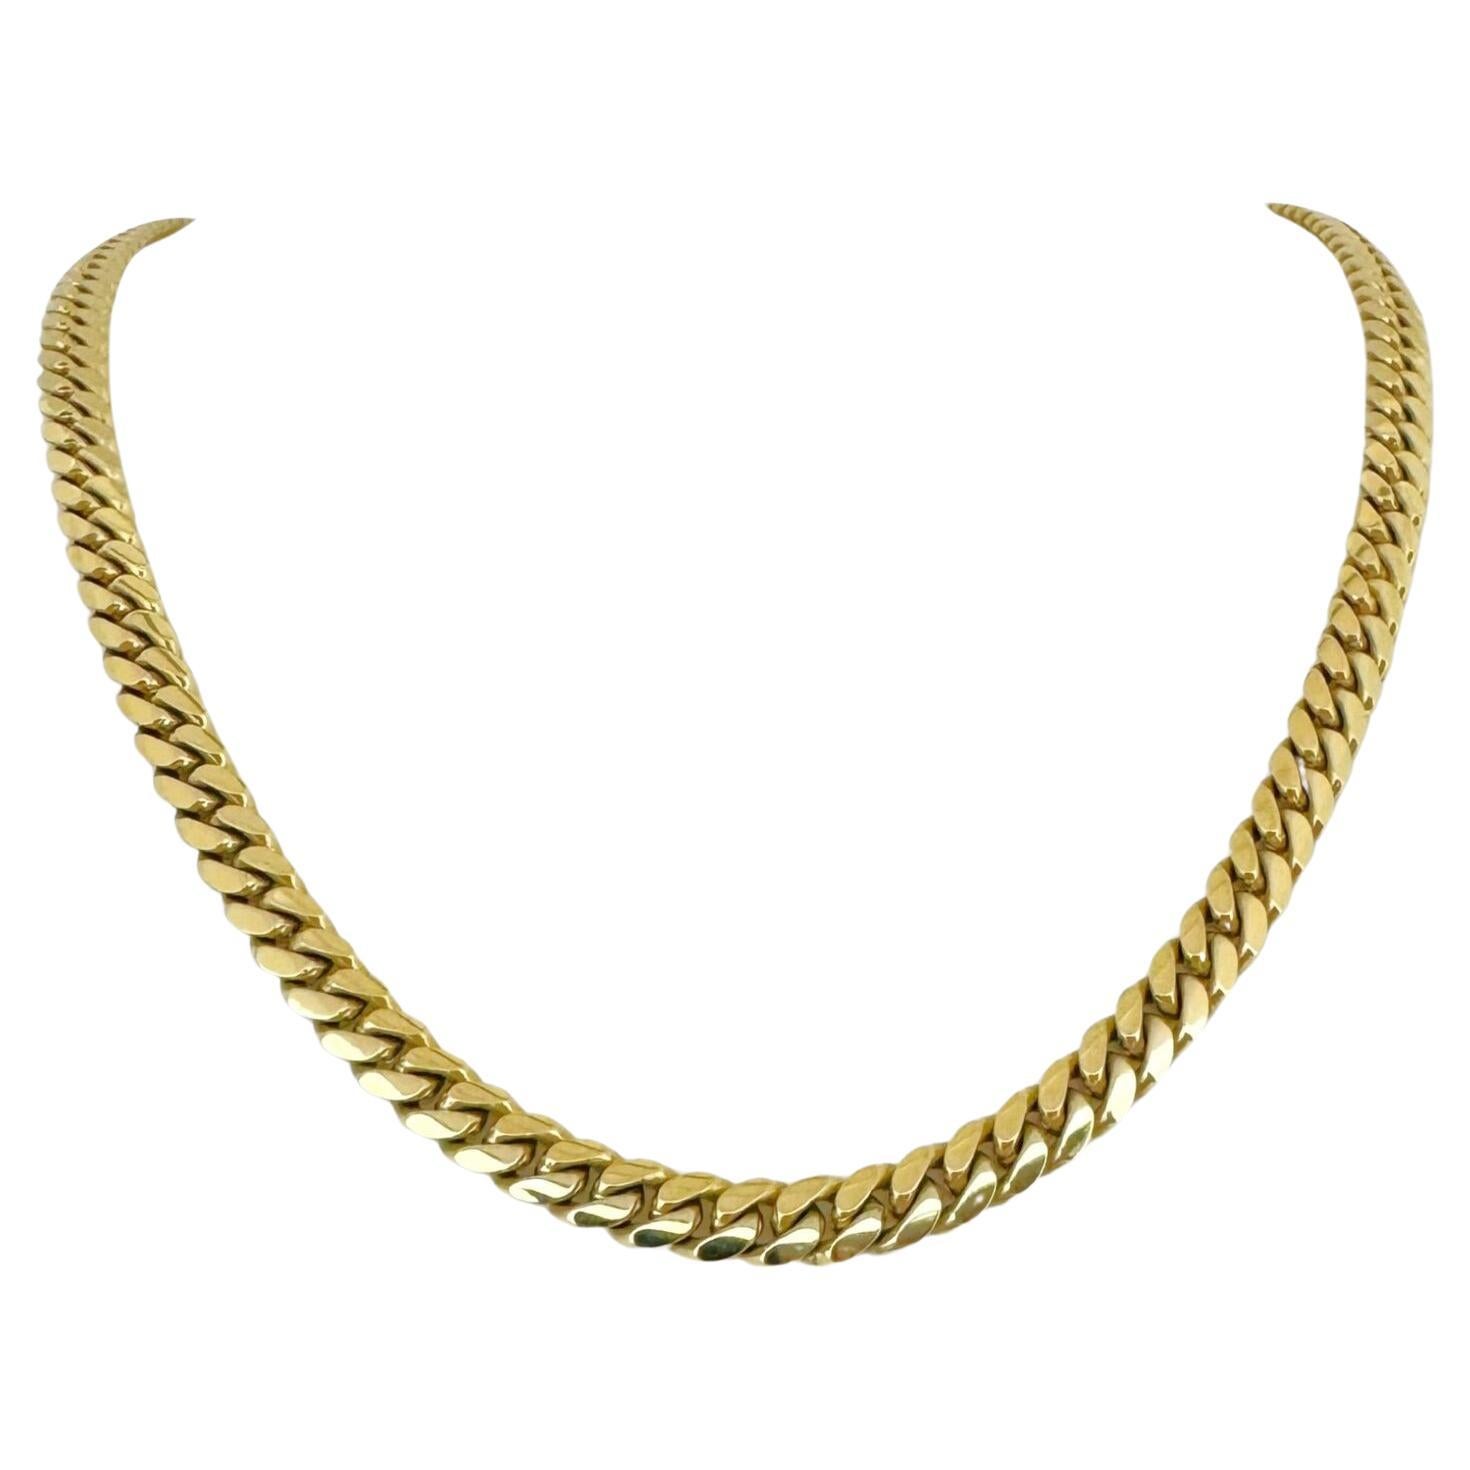 14 Karat Yellow Gold Solid Heavy Cuban Link Chain Necklace 